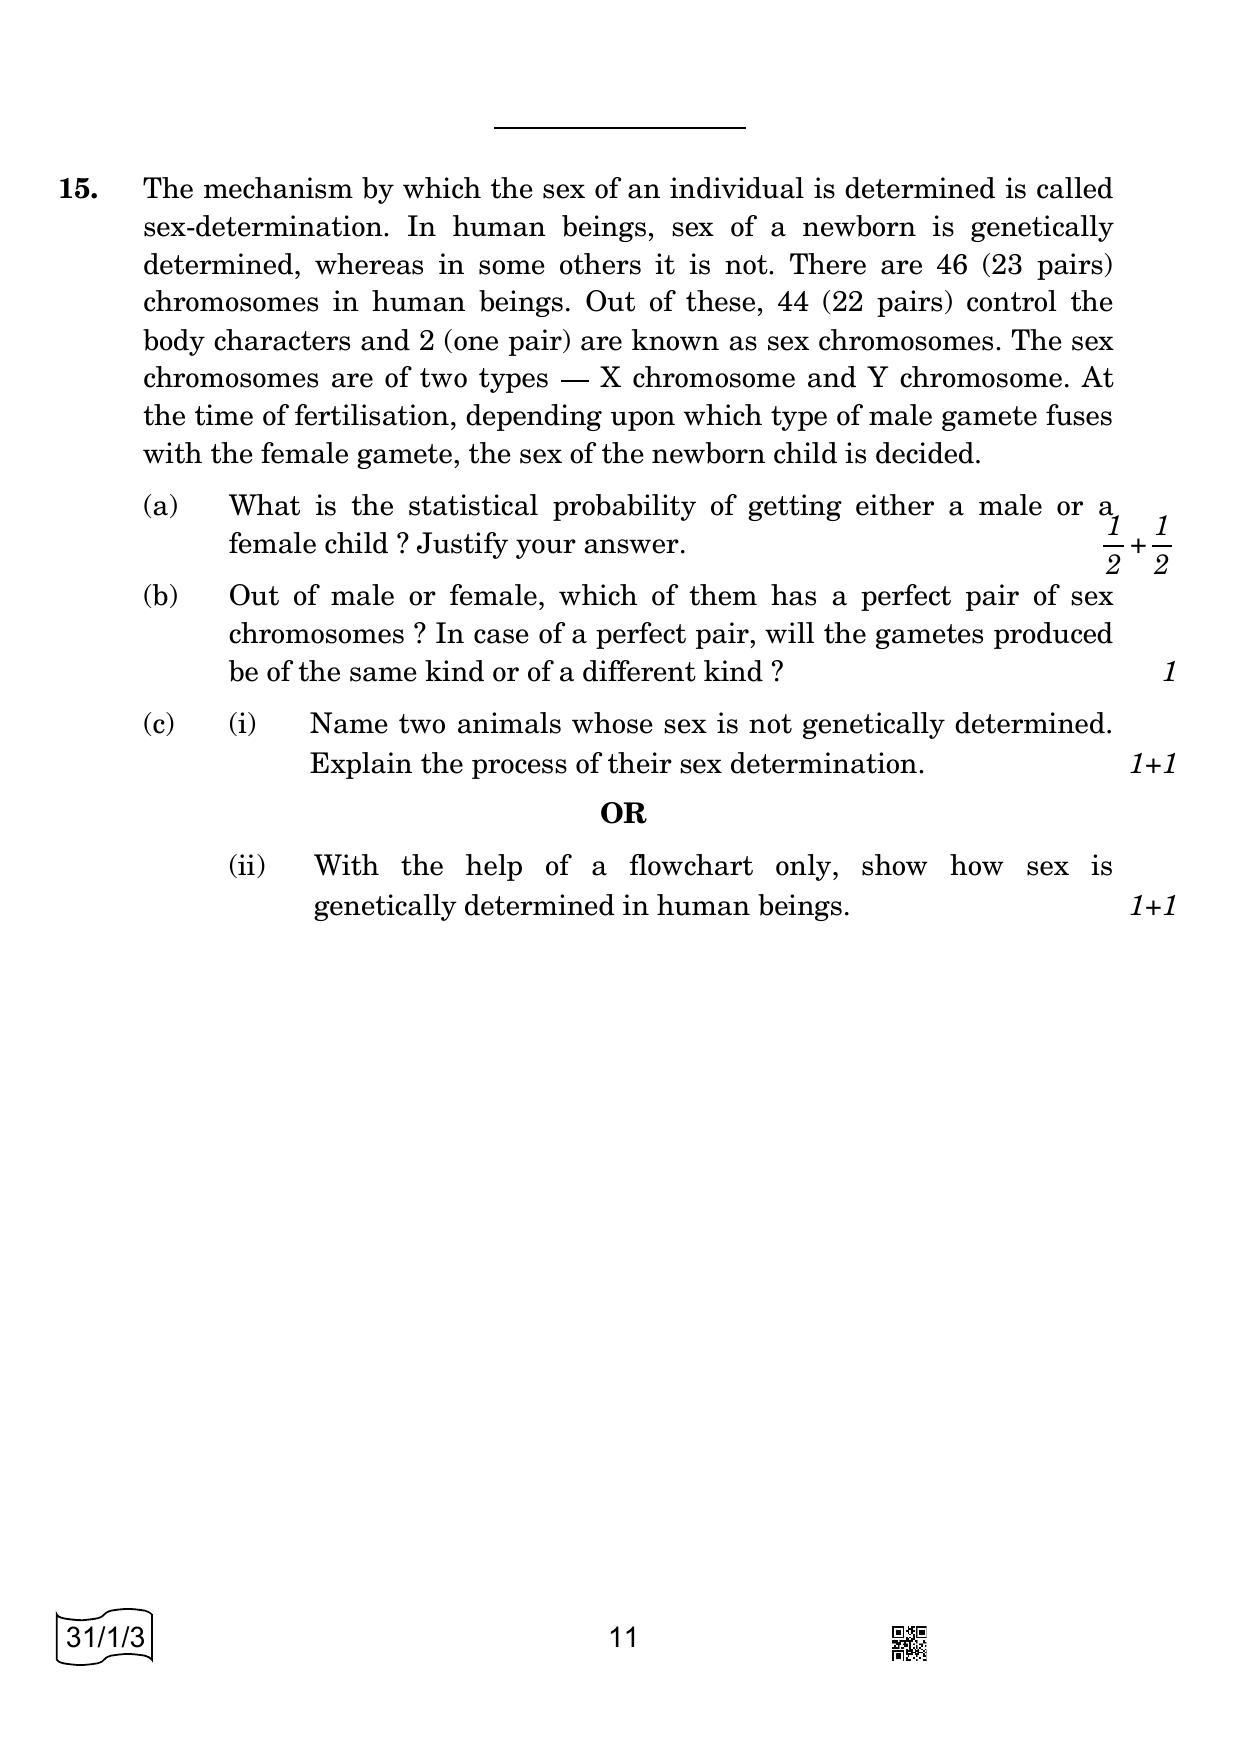 CBSE Class 10 31-1-3 Science 2022 Question Paper - Page 15